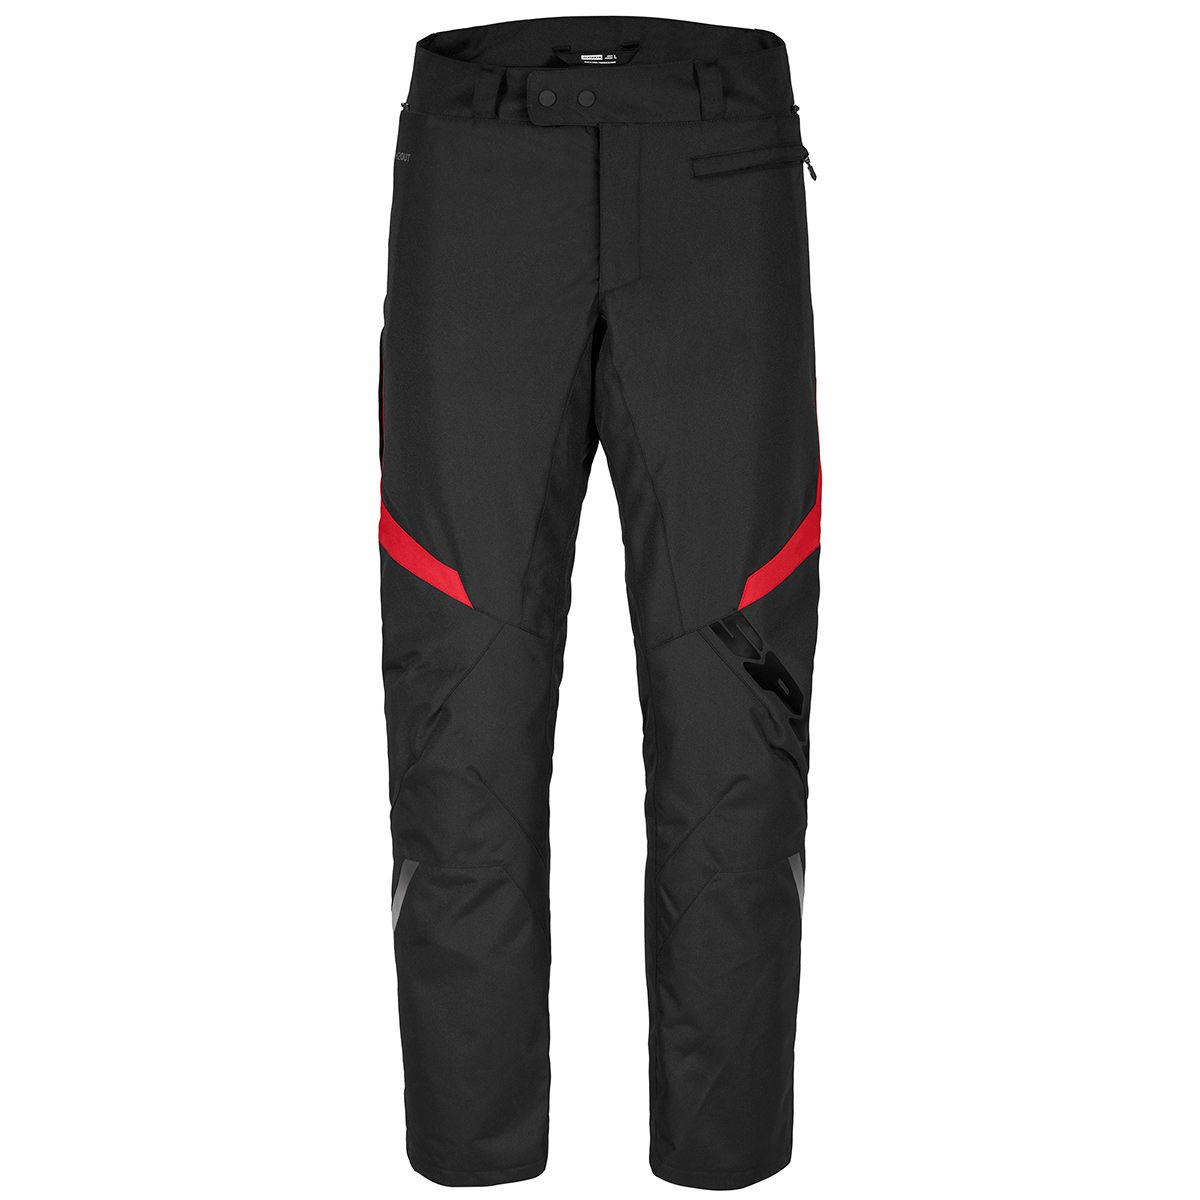 Image of Spidi Sportmaster Pants Black Red Size S ID 8030161478198